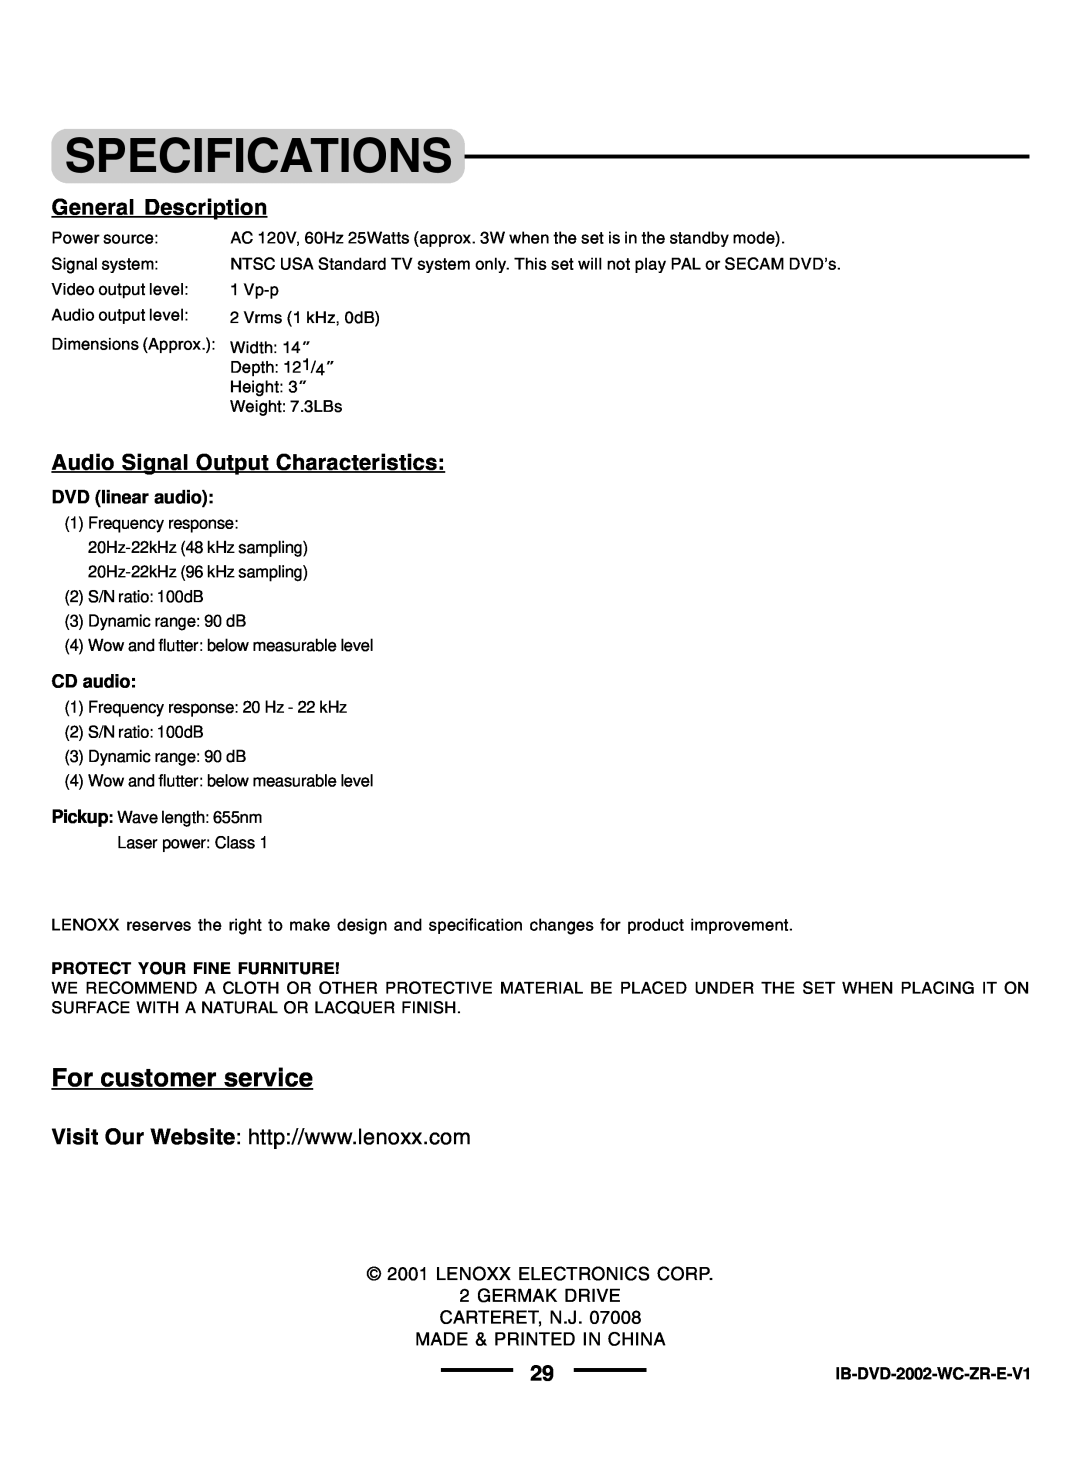 Lenoxx Electronics DVD-2002 instruction manual Specifications, For customer service, DVD linear audio, CD audio 